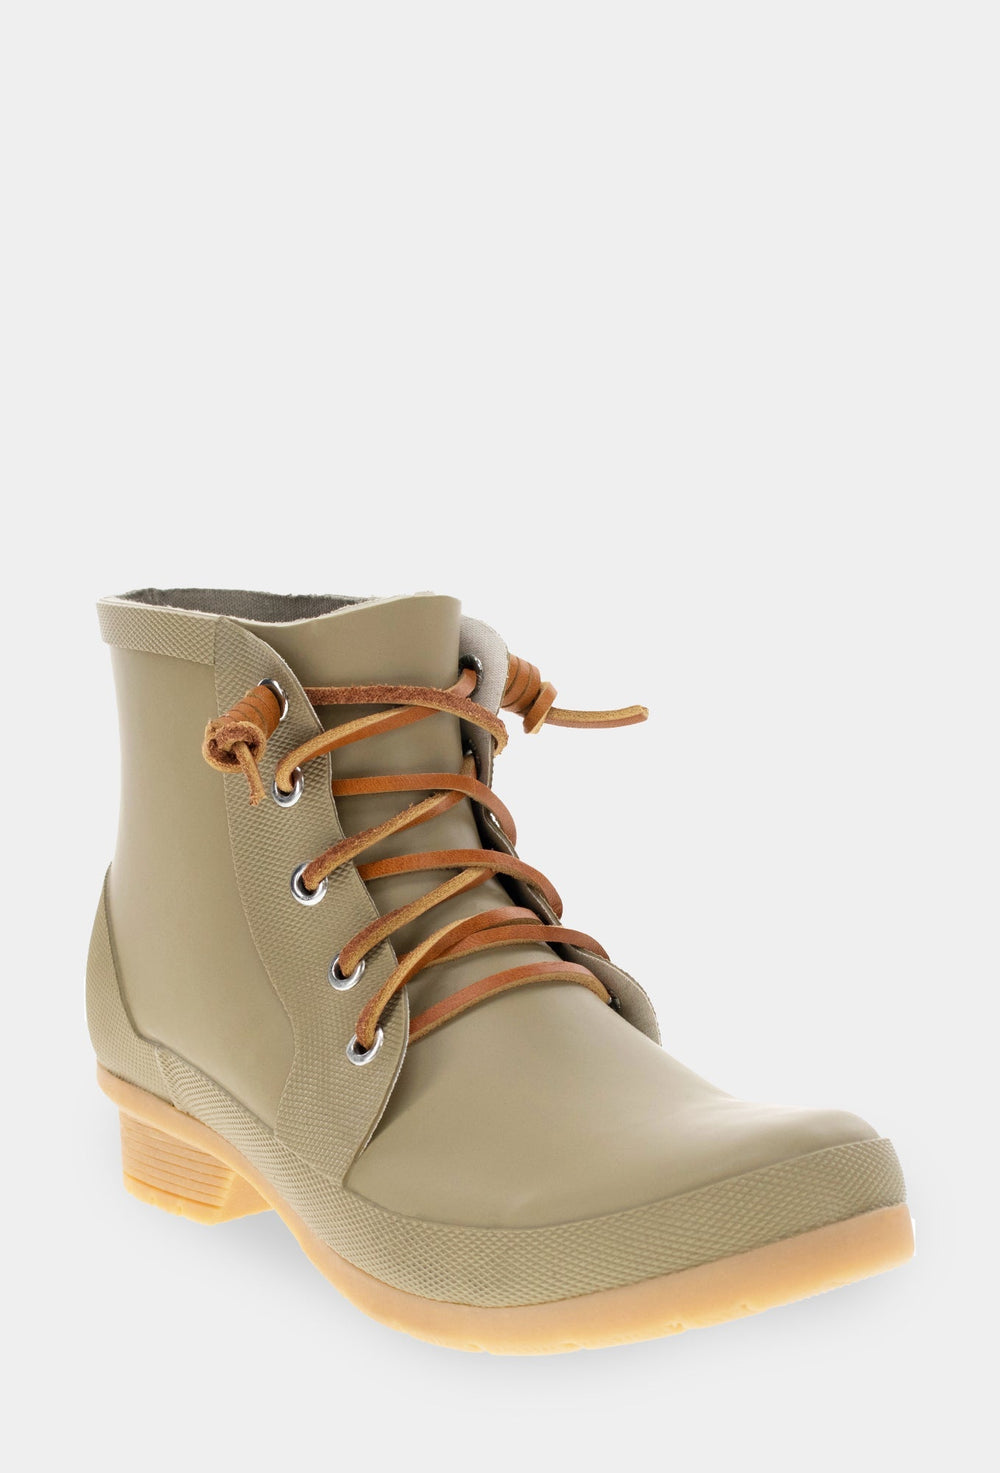 Lace Up Ankle Rain Boot - Moss - Western Chief